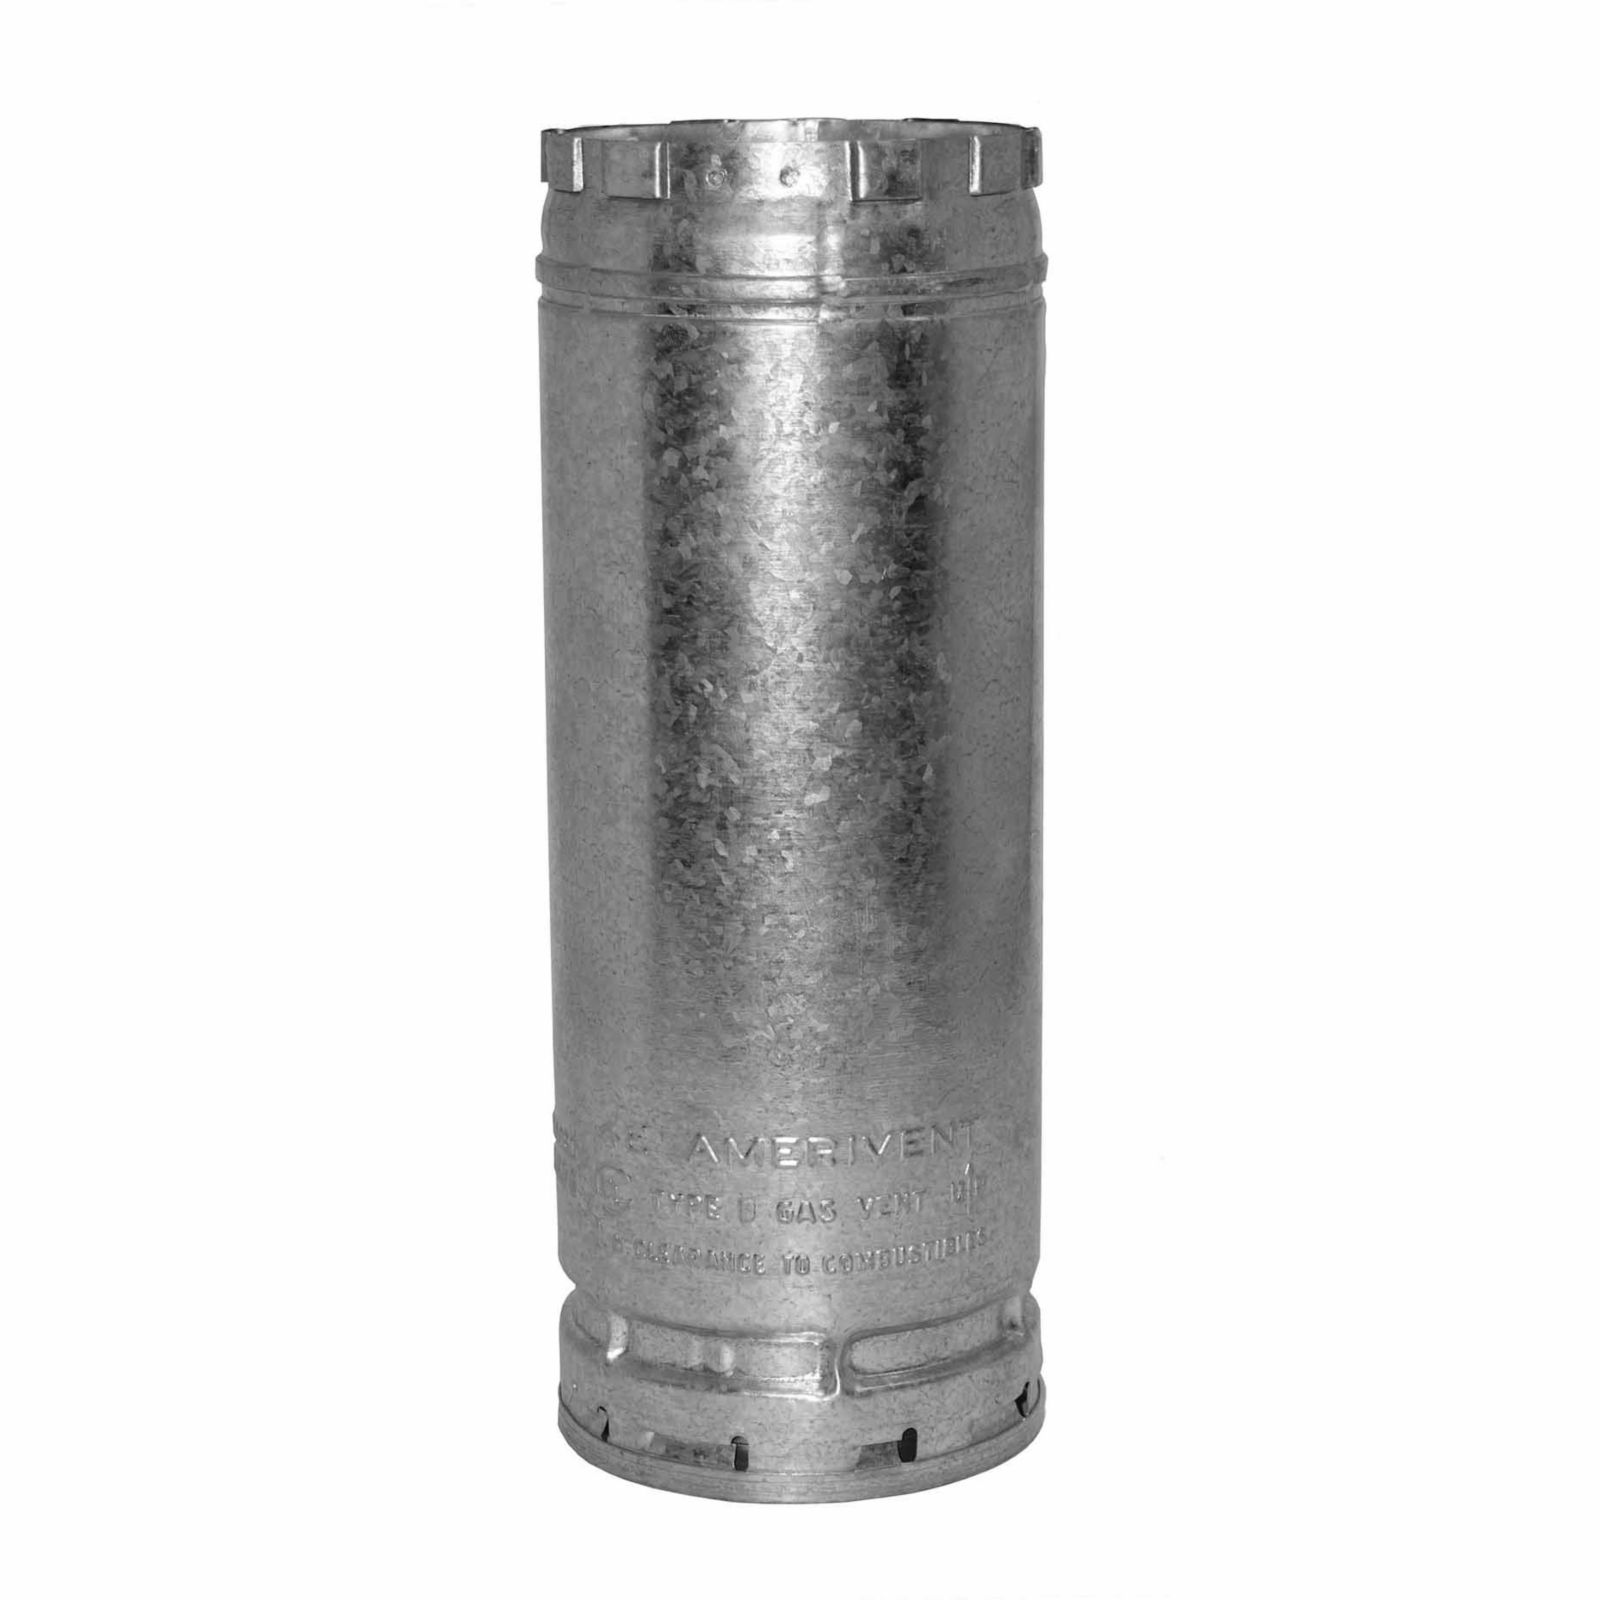 AmeriVent 5E4 - Pipe Section Type B Gas Vent, 5" Round X 48" Length